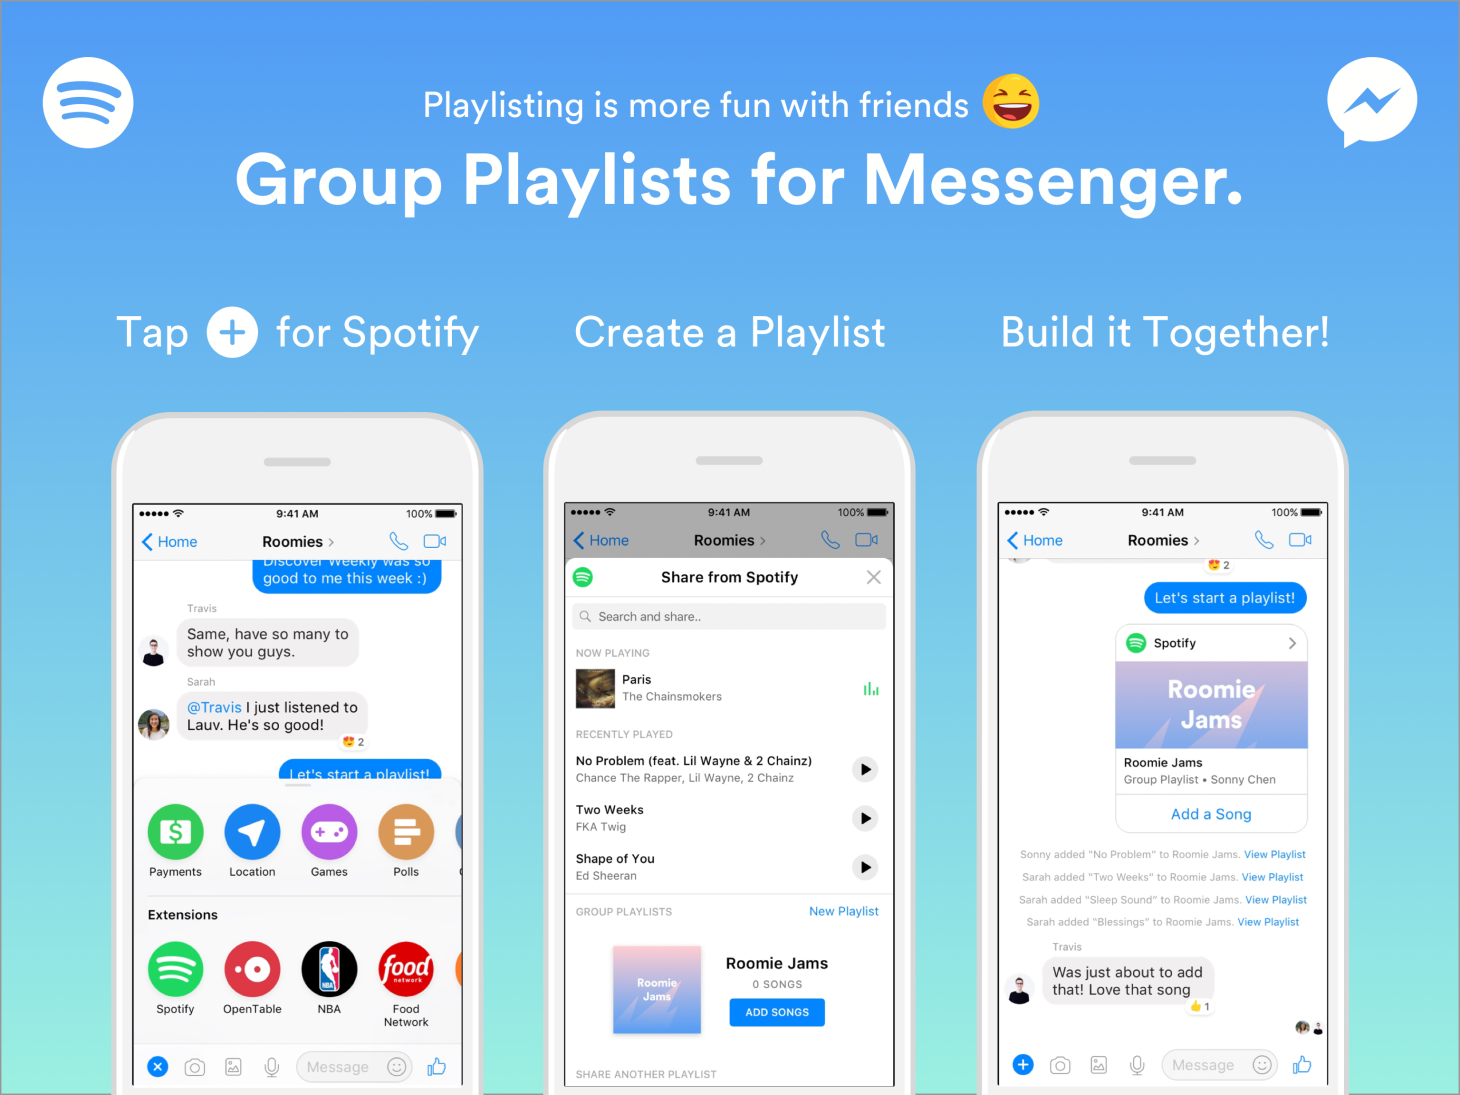 A graphic created by Spotify illustrating how to use Spotify's integration with Facebook Messenger